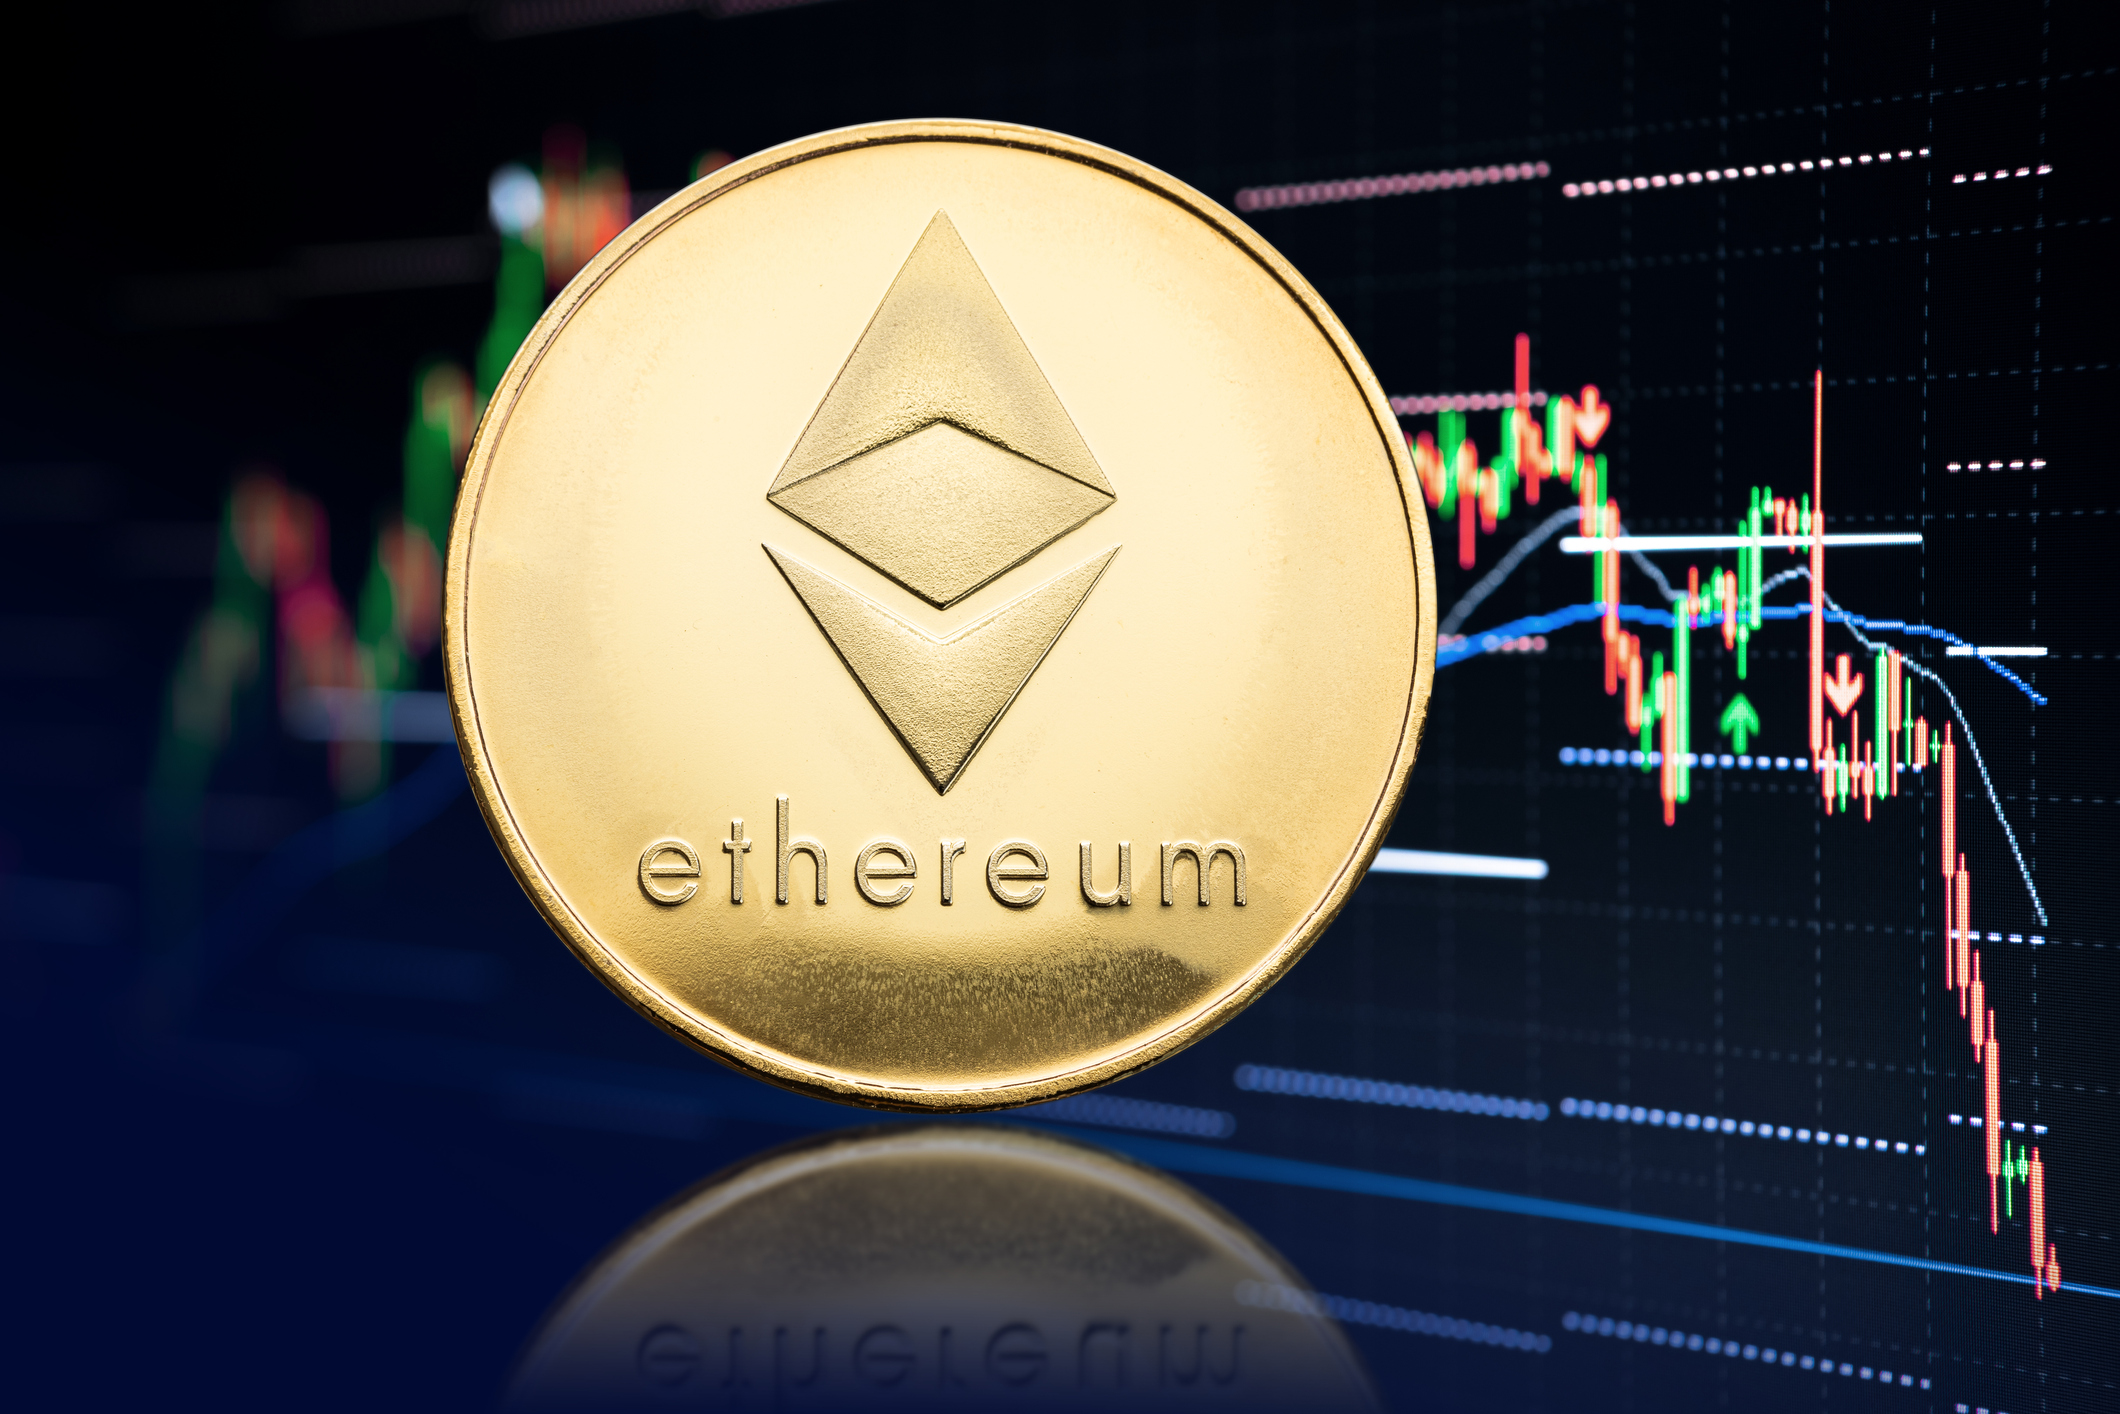 Ethereum Price To Reach $5,000, BitMex Founder Predicts